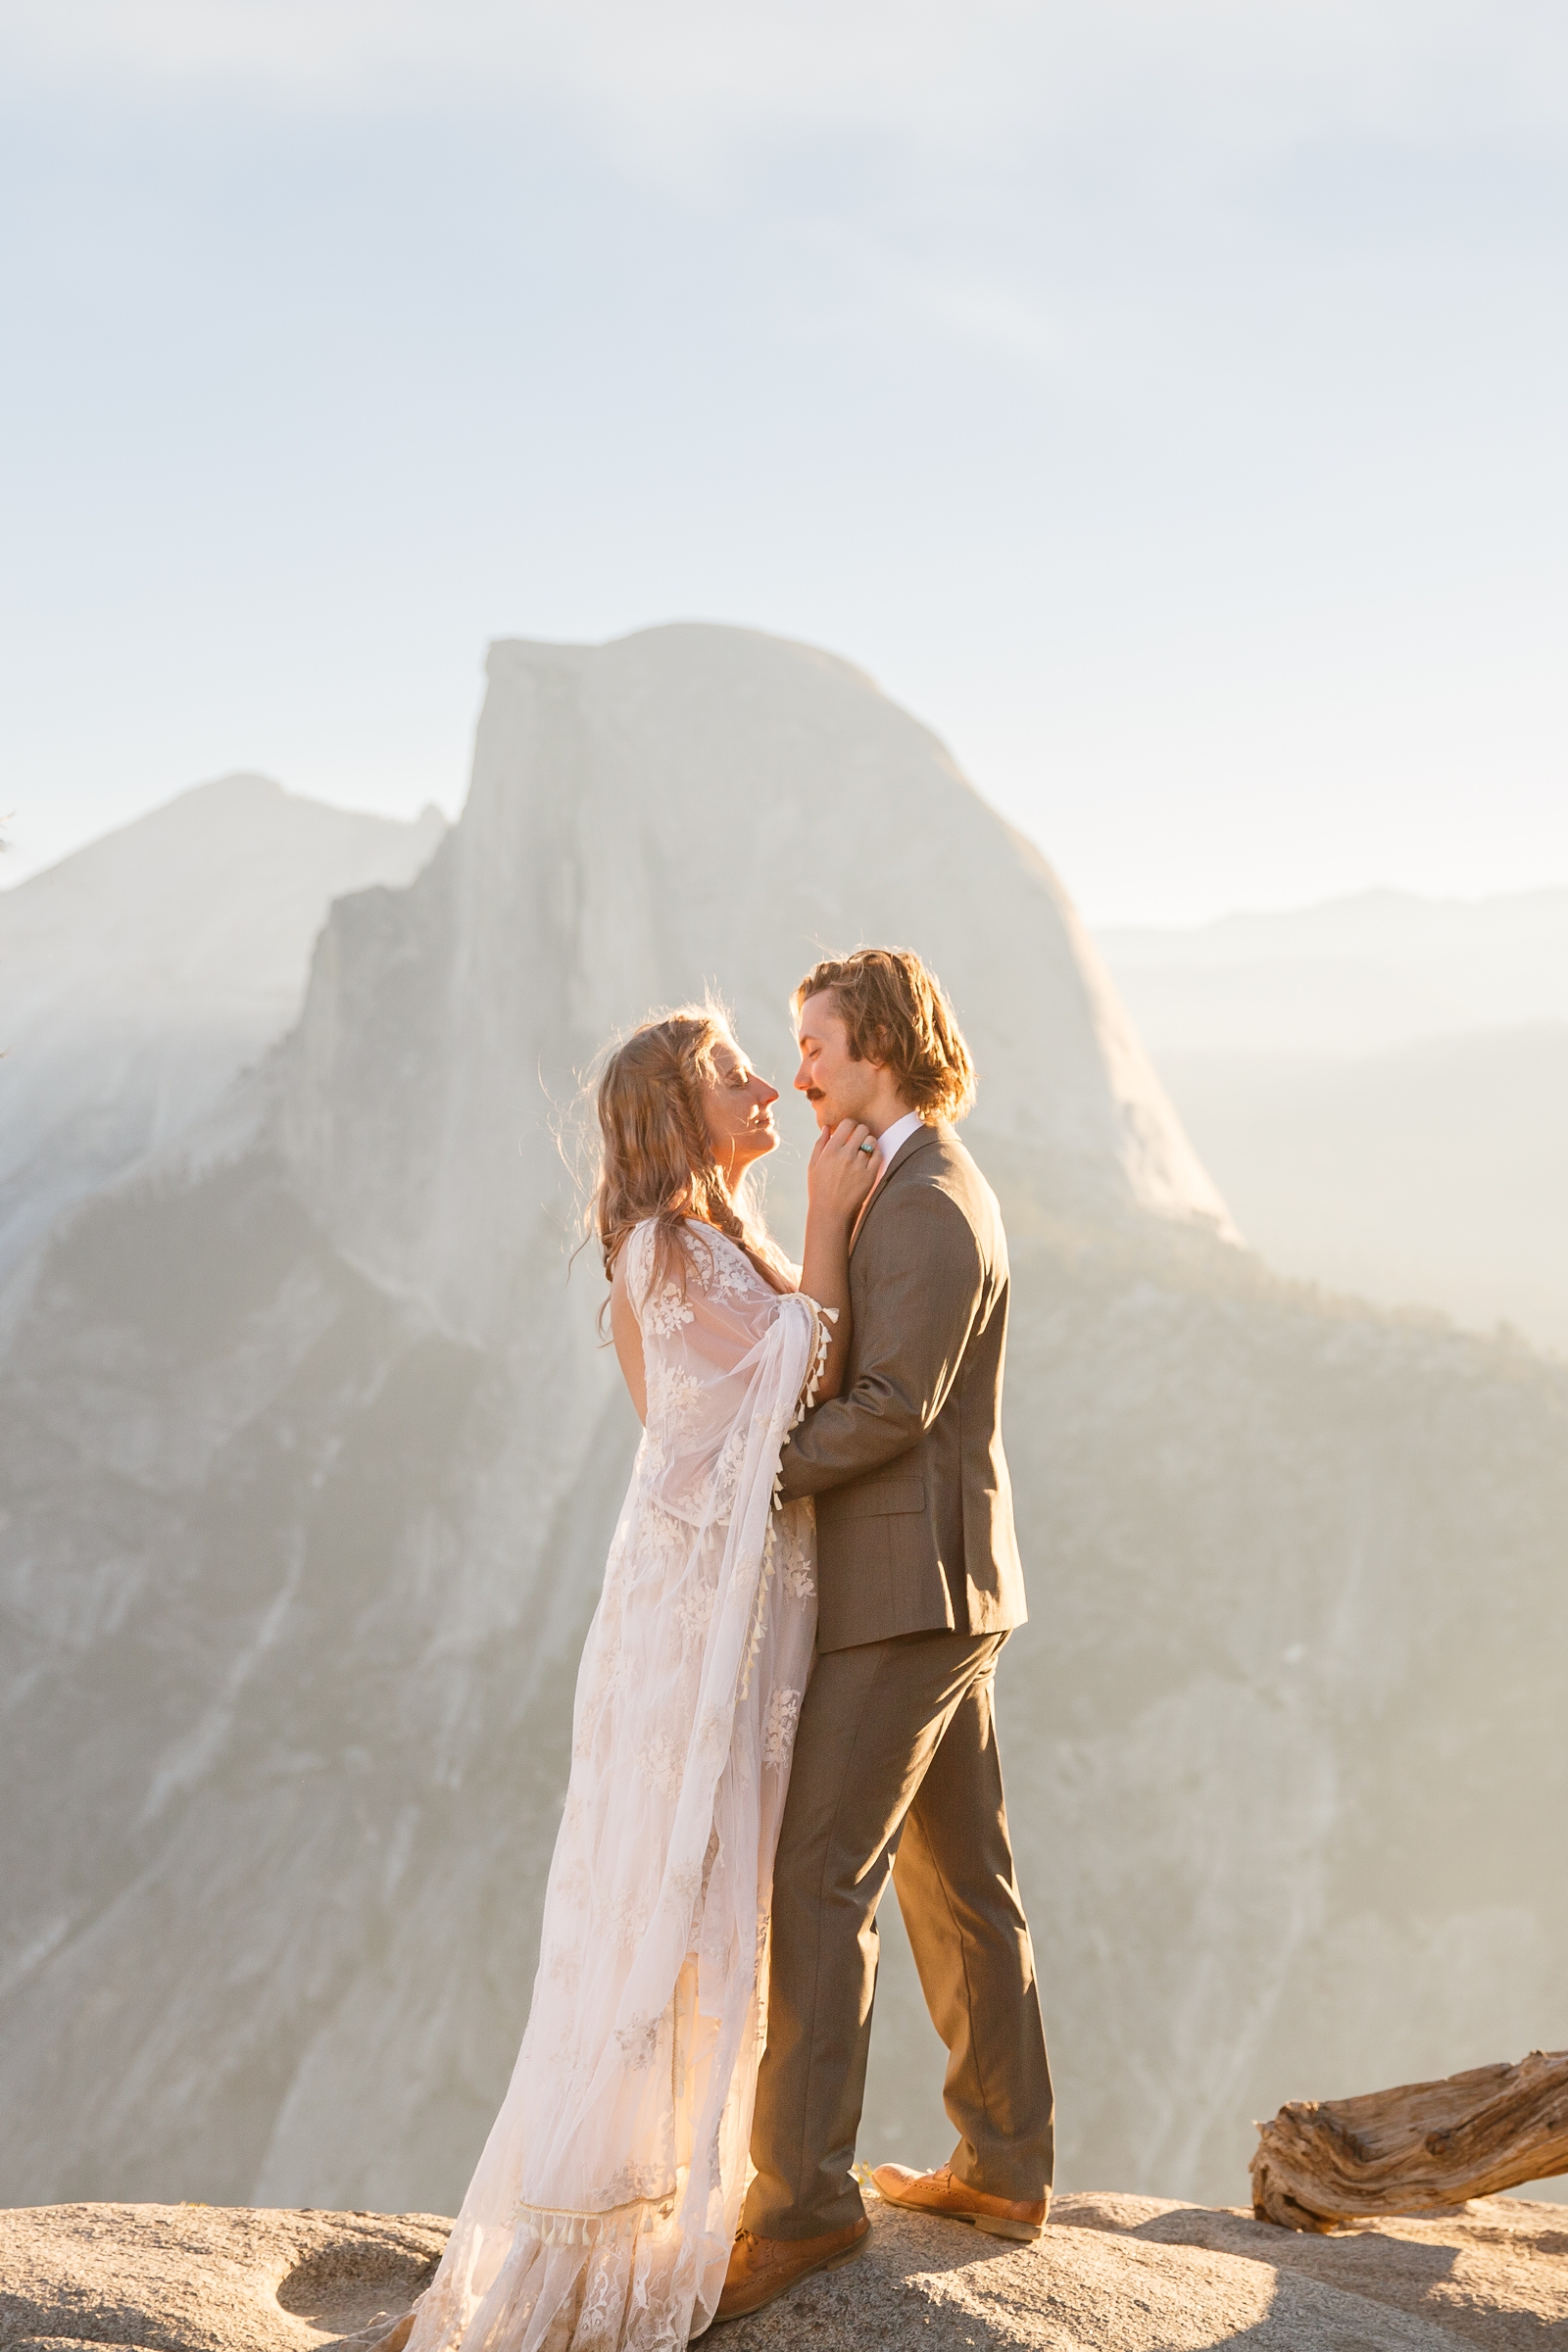 Adventurous couple eloping in front of Half Dome in Yosemite National Park.